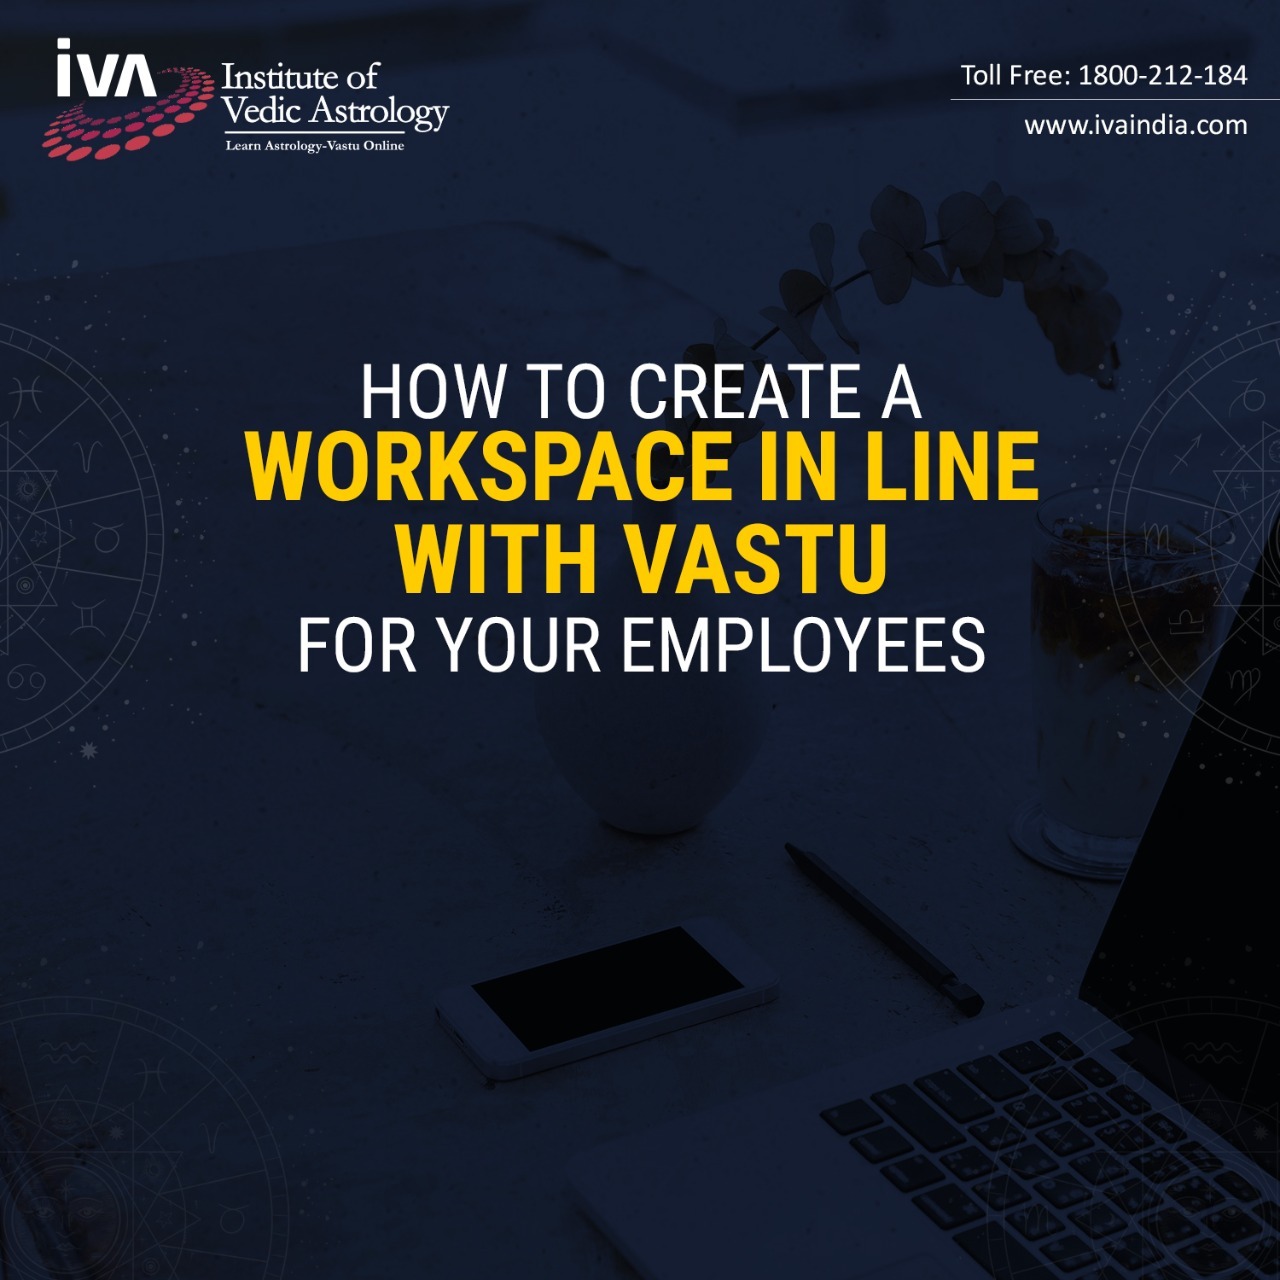 How to create a workplace in line with Vastu for prosperity